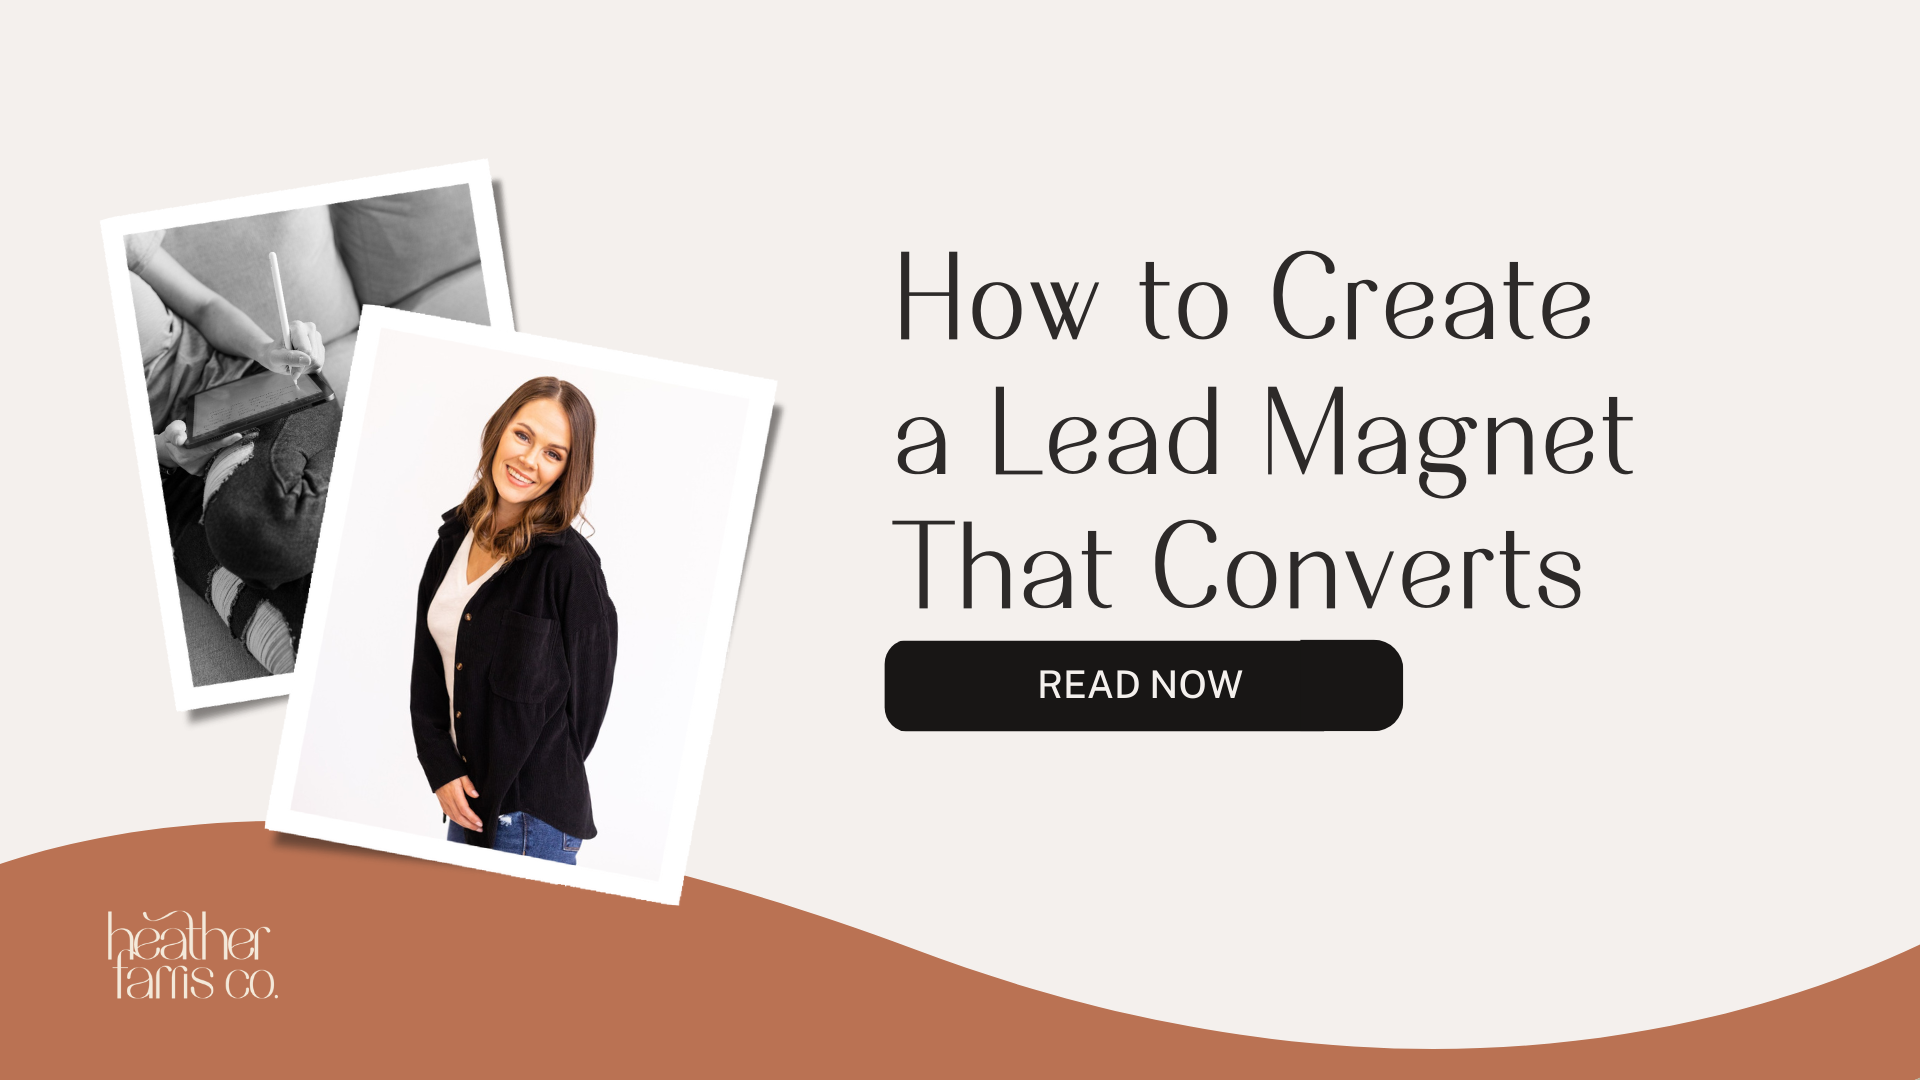 How to Create a Lead Magnet That Converts